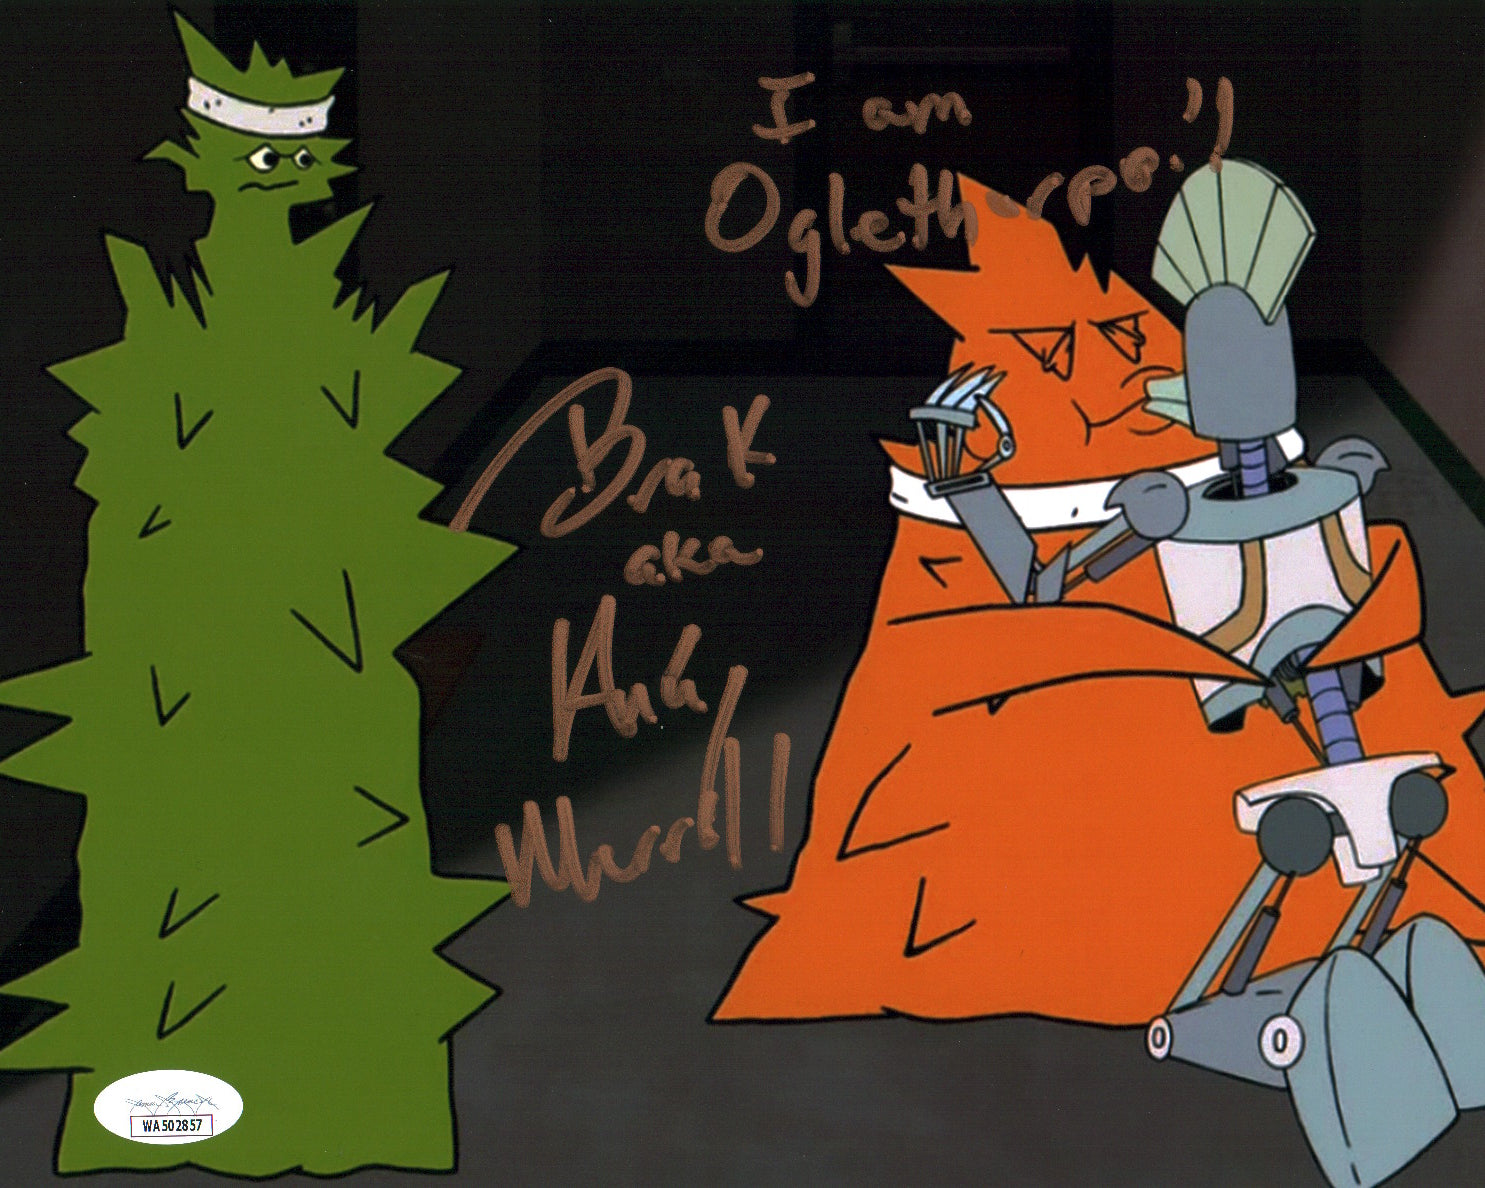 Andy Merrill Aqua Teen Hunger Force 8x10 Photo Signed JSA Certified Autograph GalaxyCon